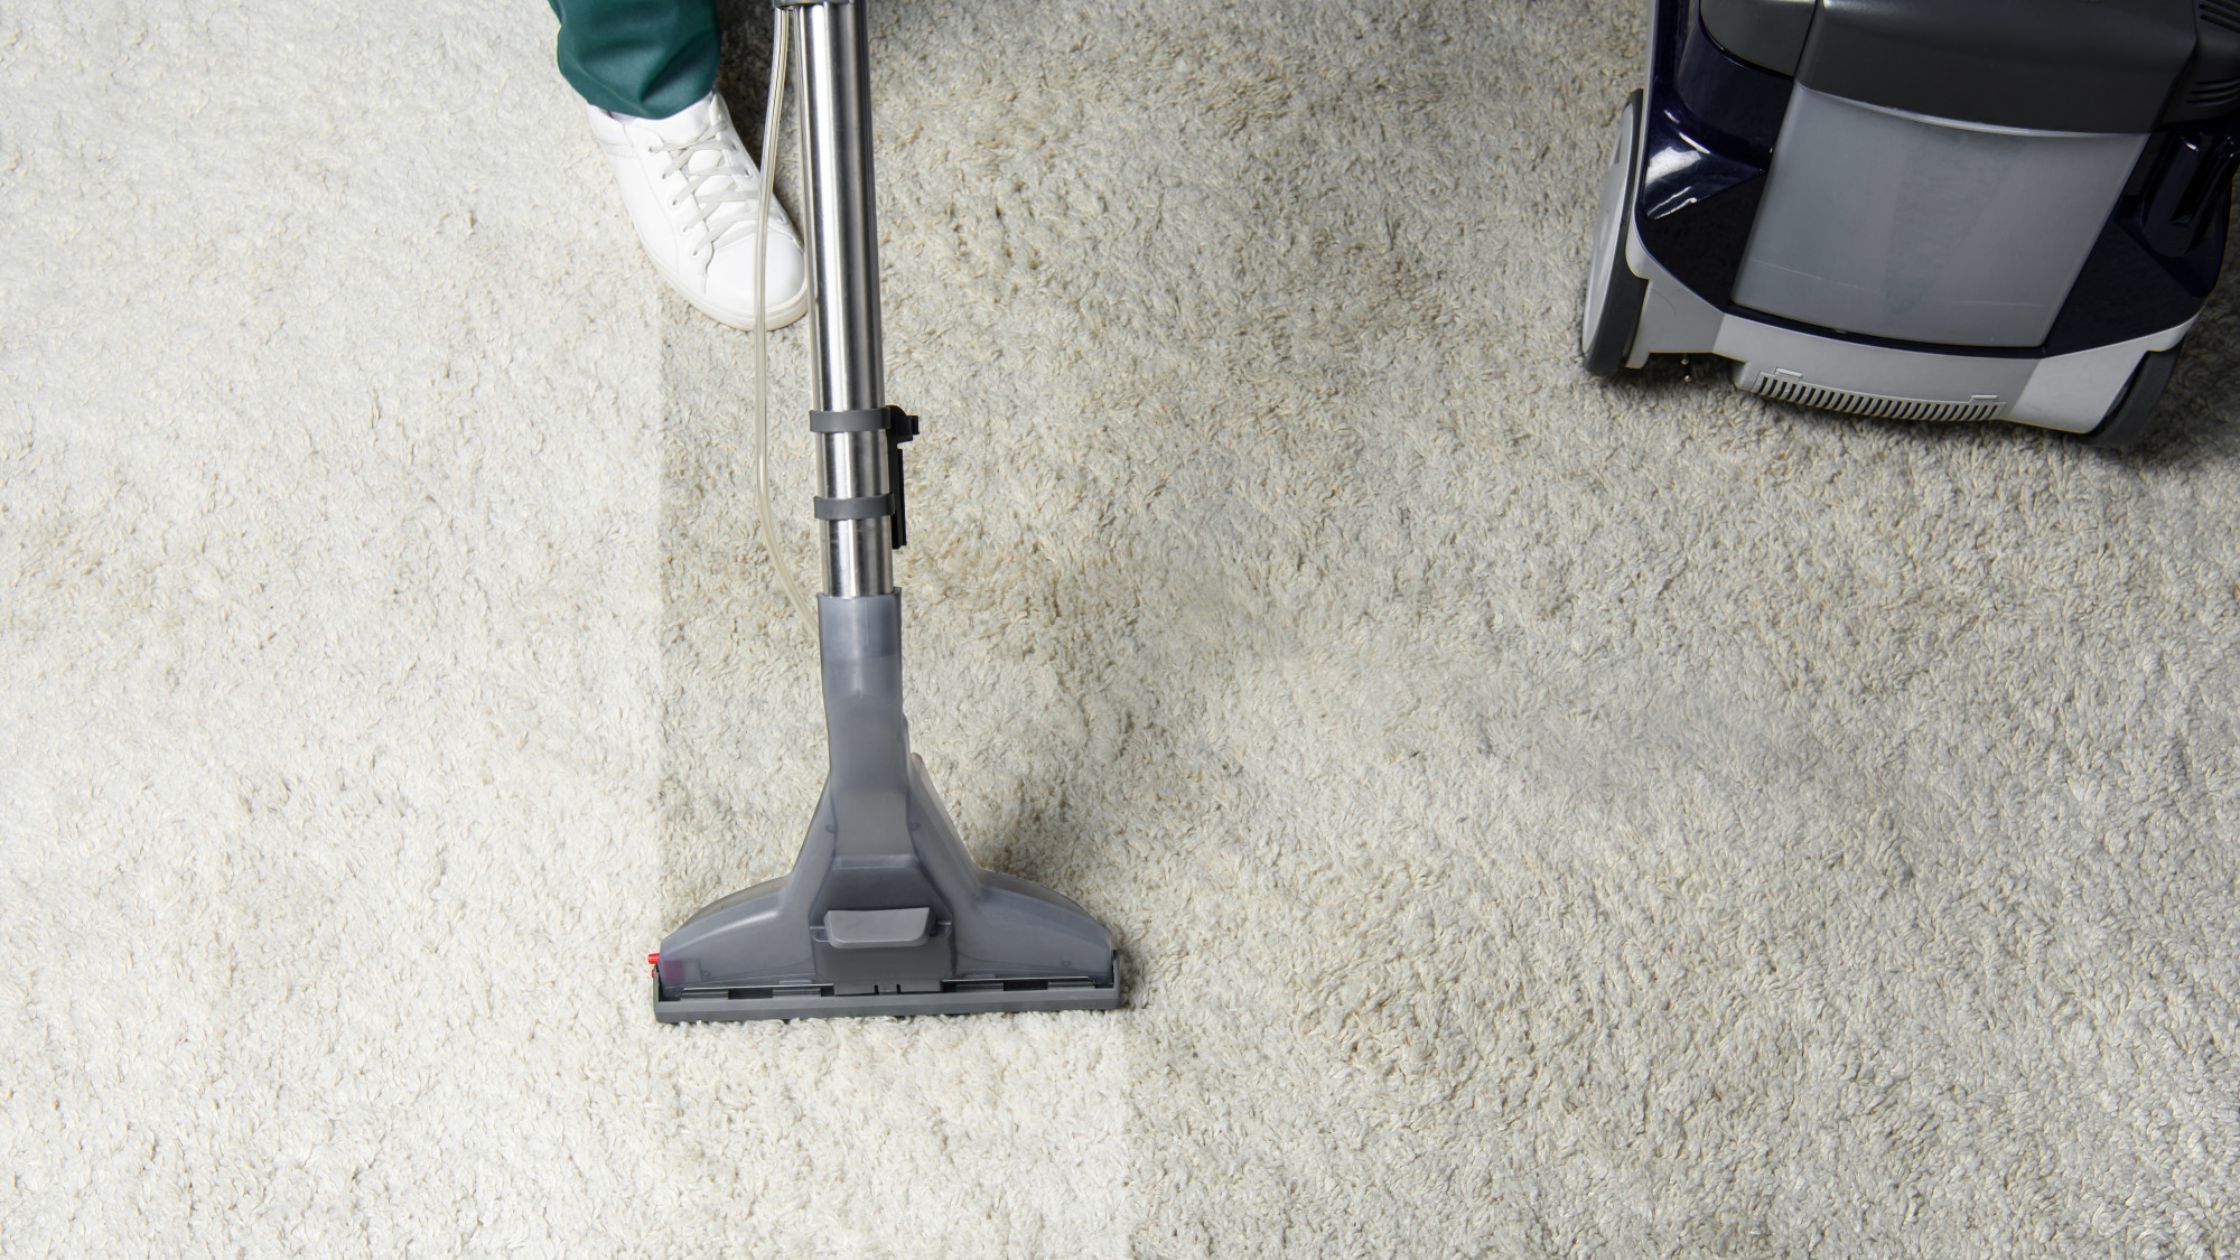 5 Things You Most Likely Didn’t Know About Carpet Cleaning